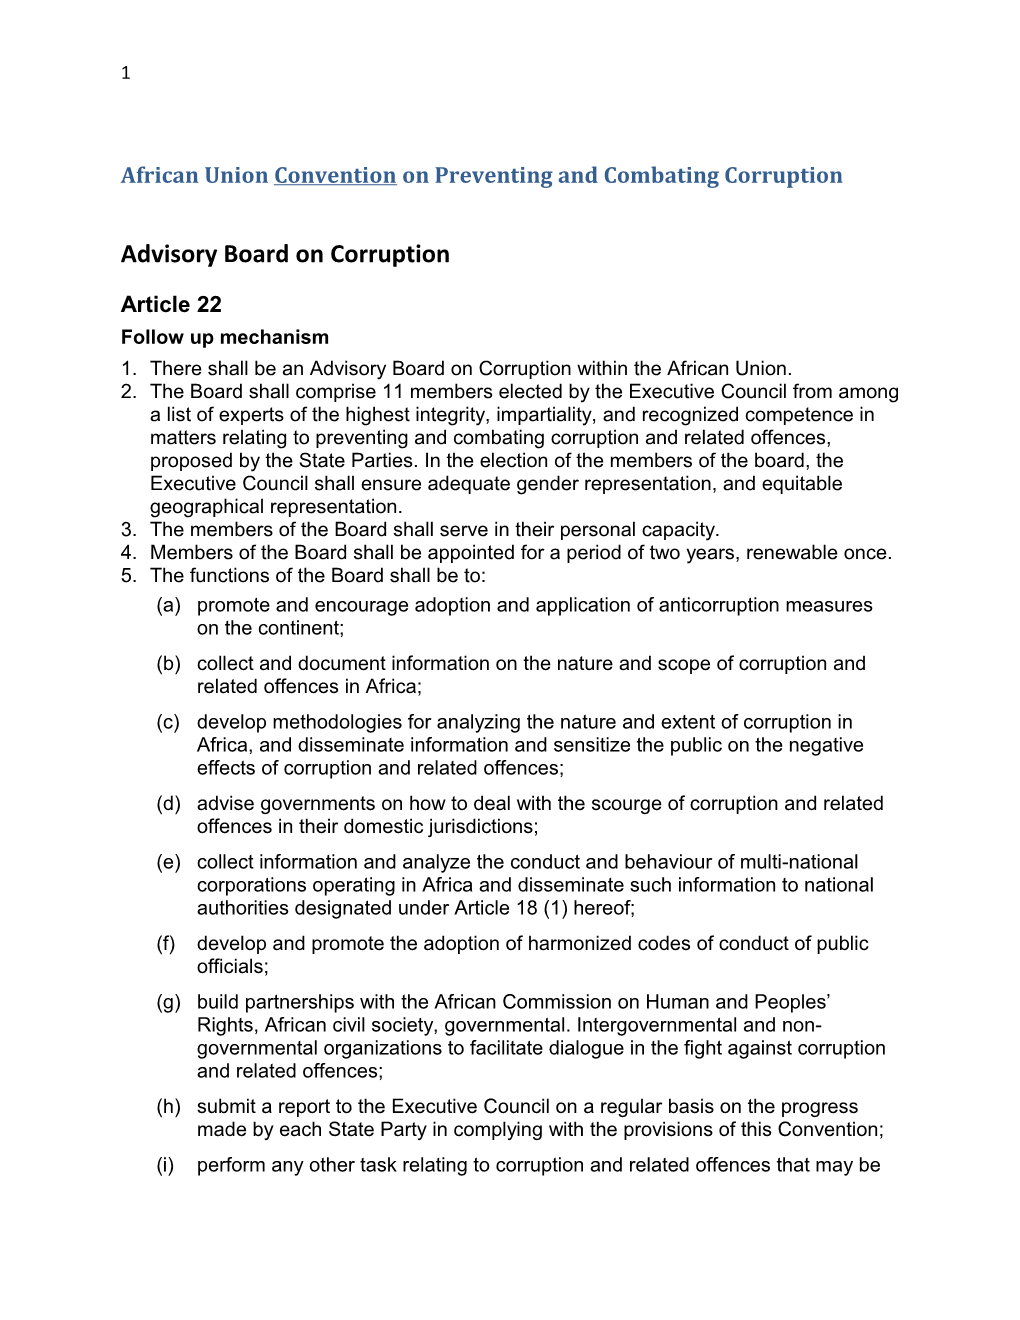 African Union Convention on Preventing and Combating Corruption